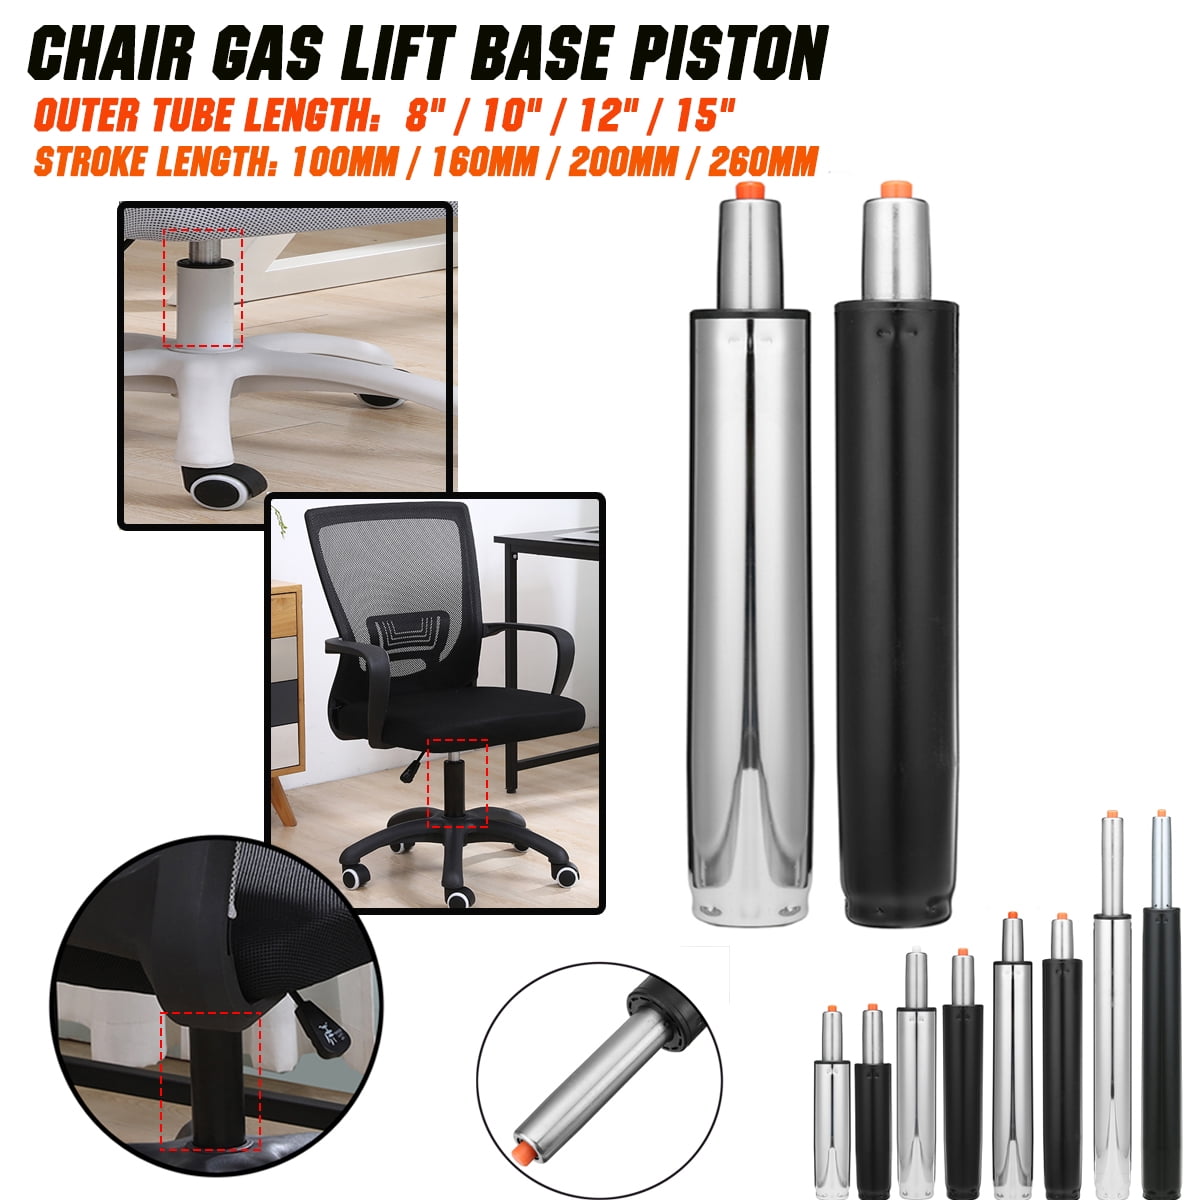 9 inch Replacement Gas Lift Office Chair Spare Adjustable Seat Base Piston